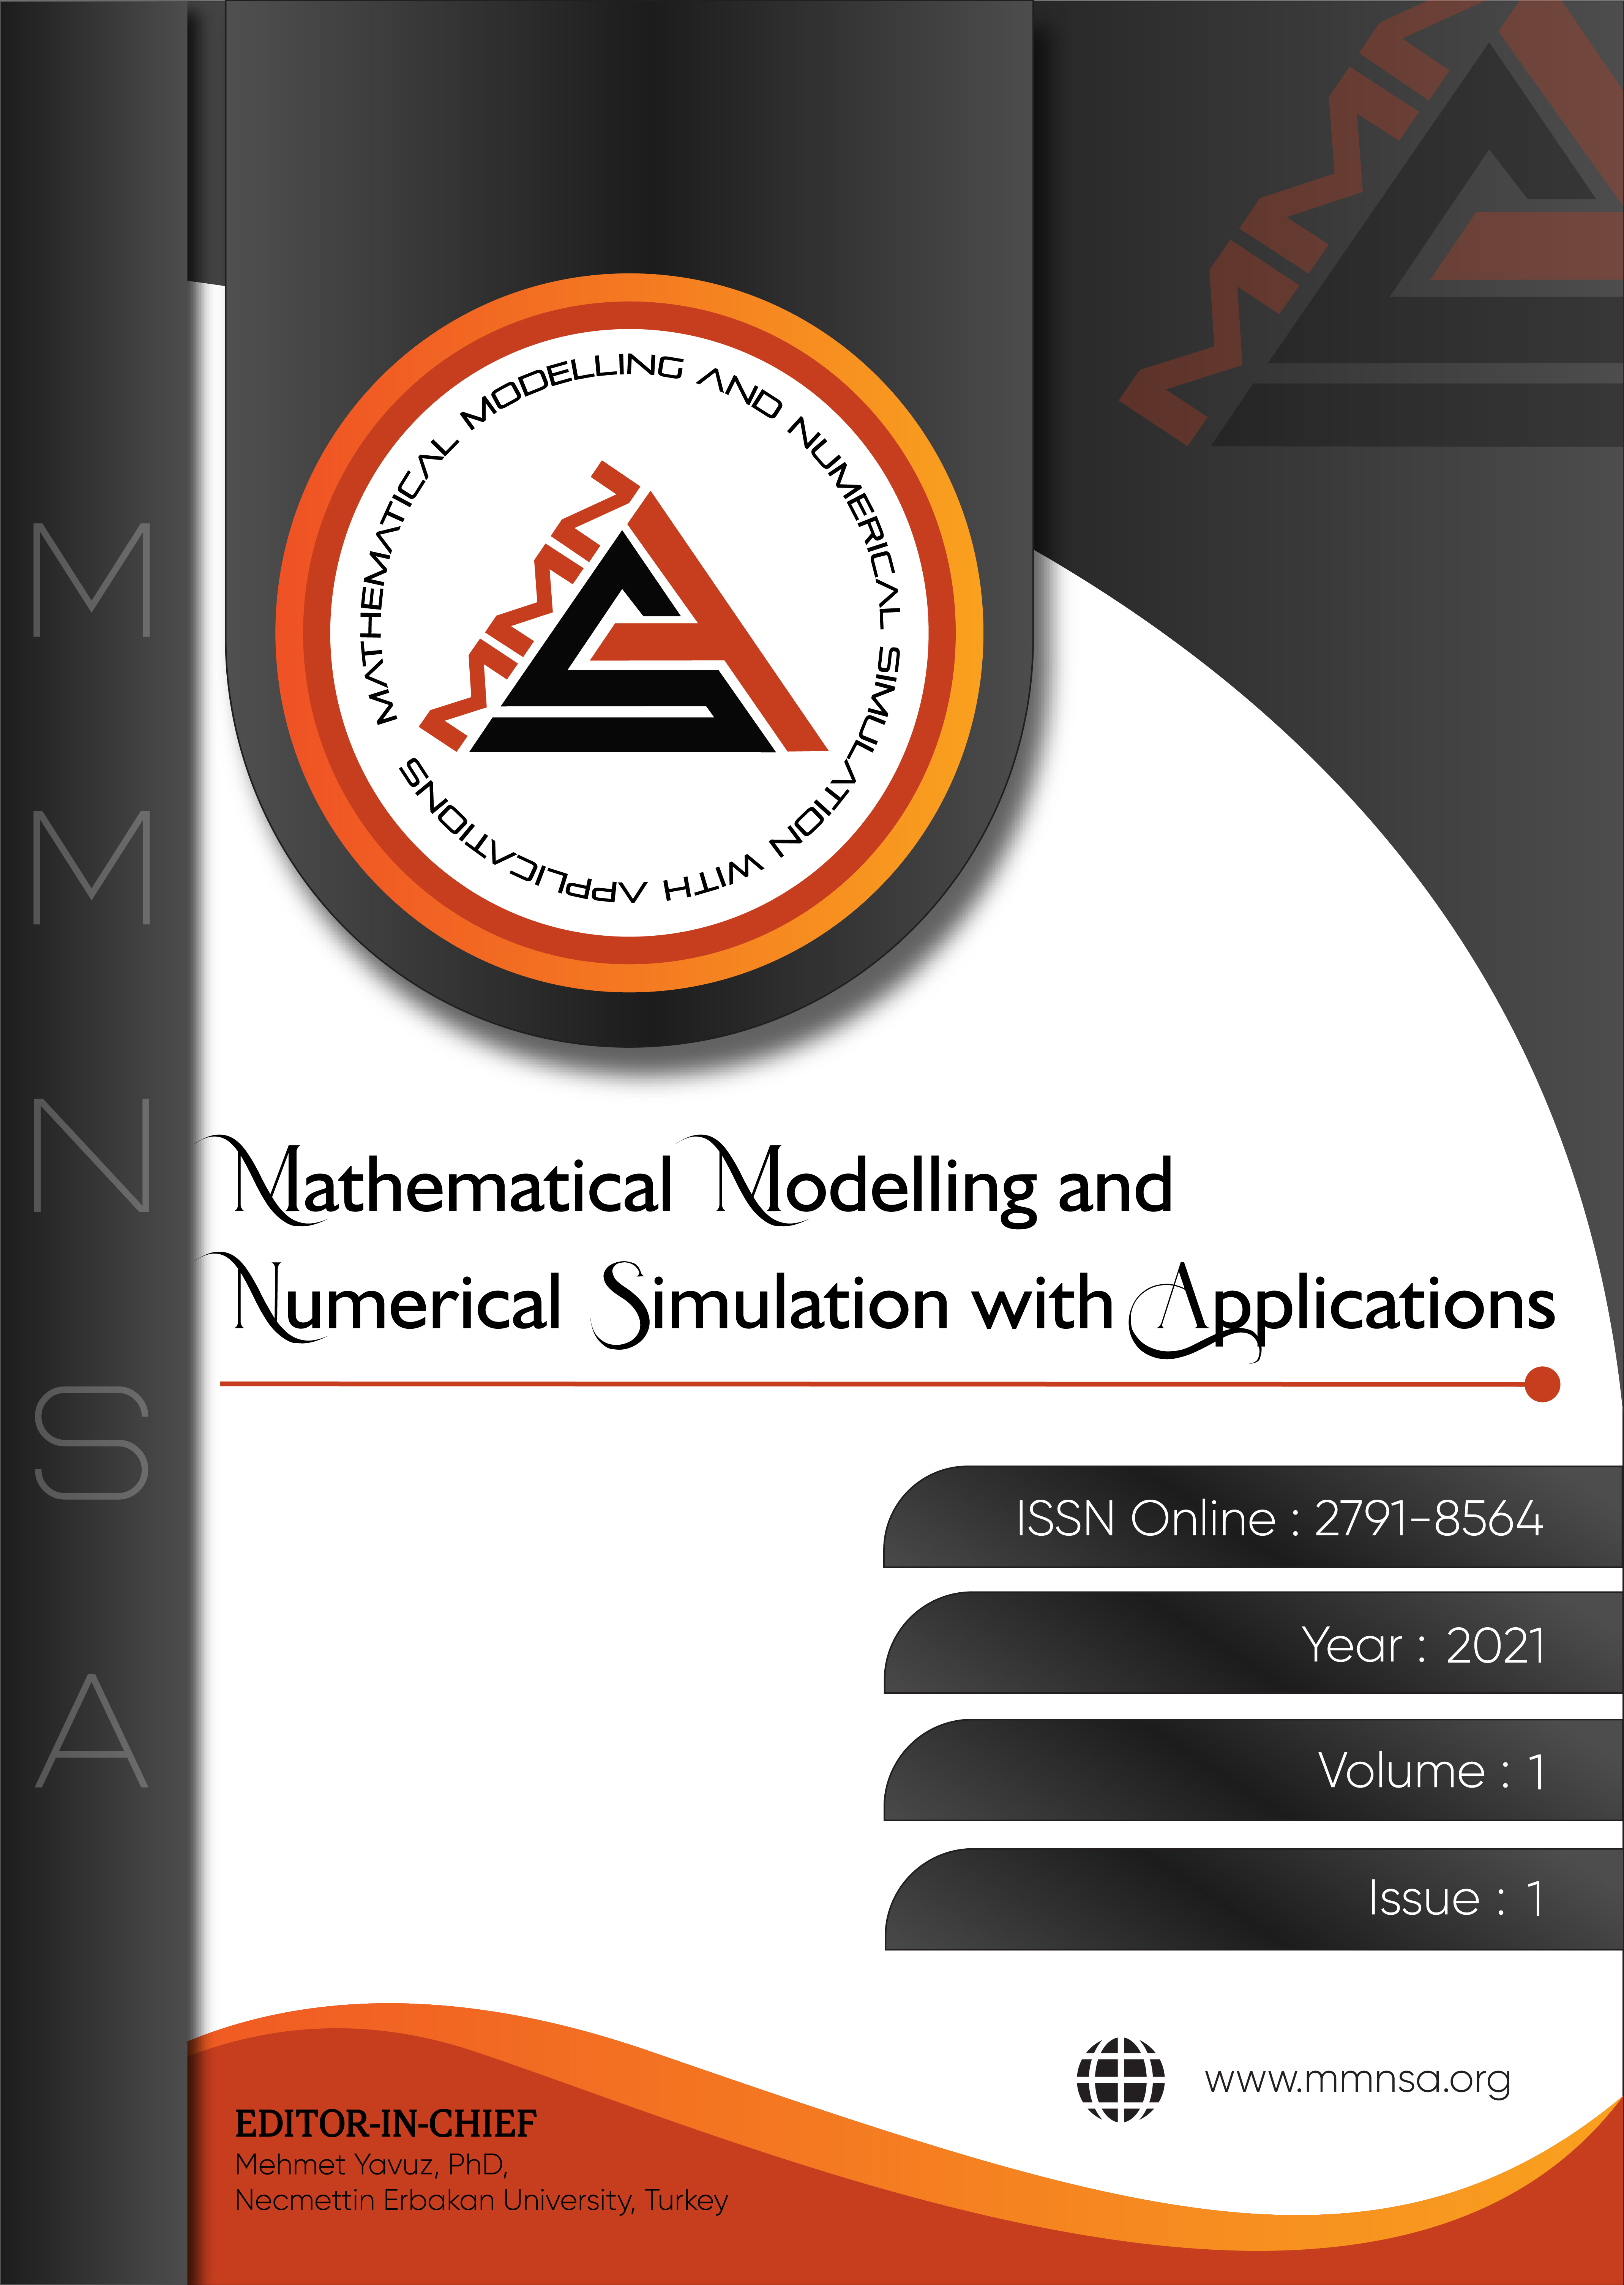 Mathematical Modelling and Numerical Simulation with Applications-Asos İndeks